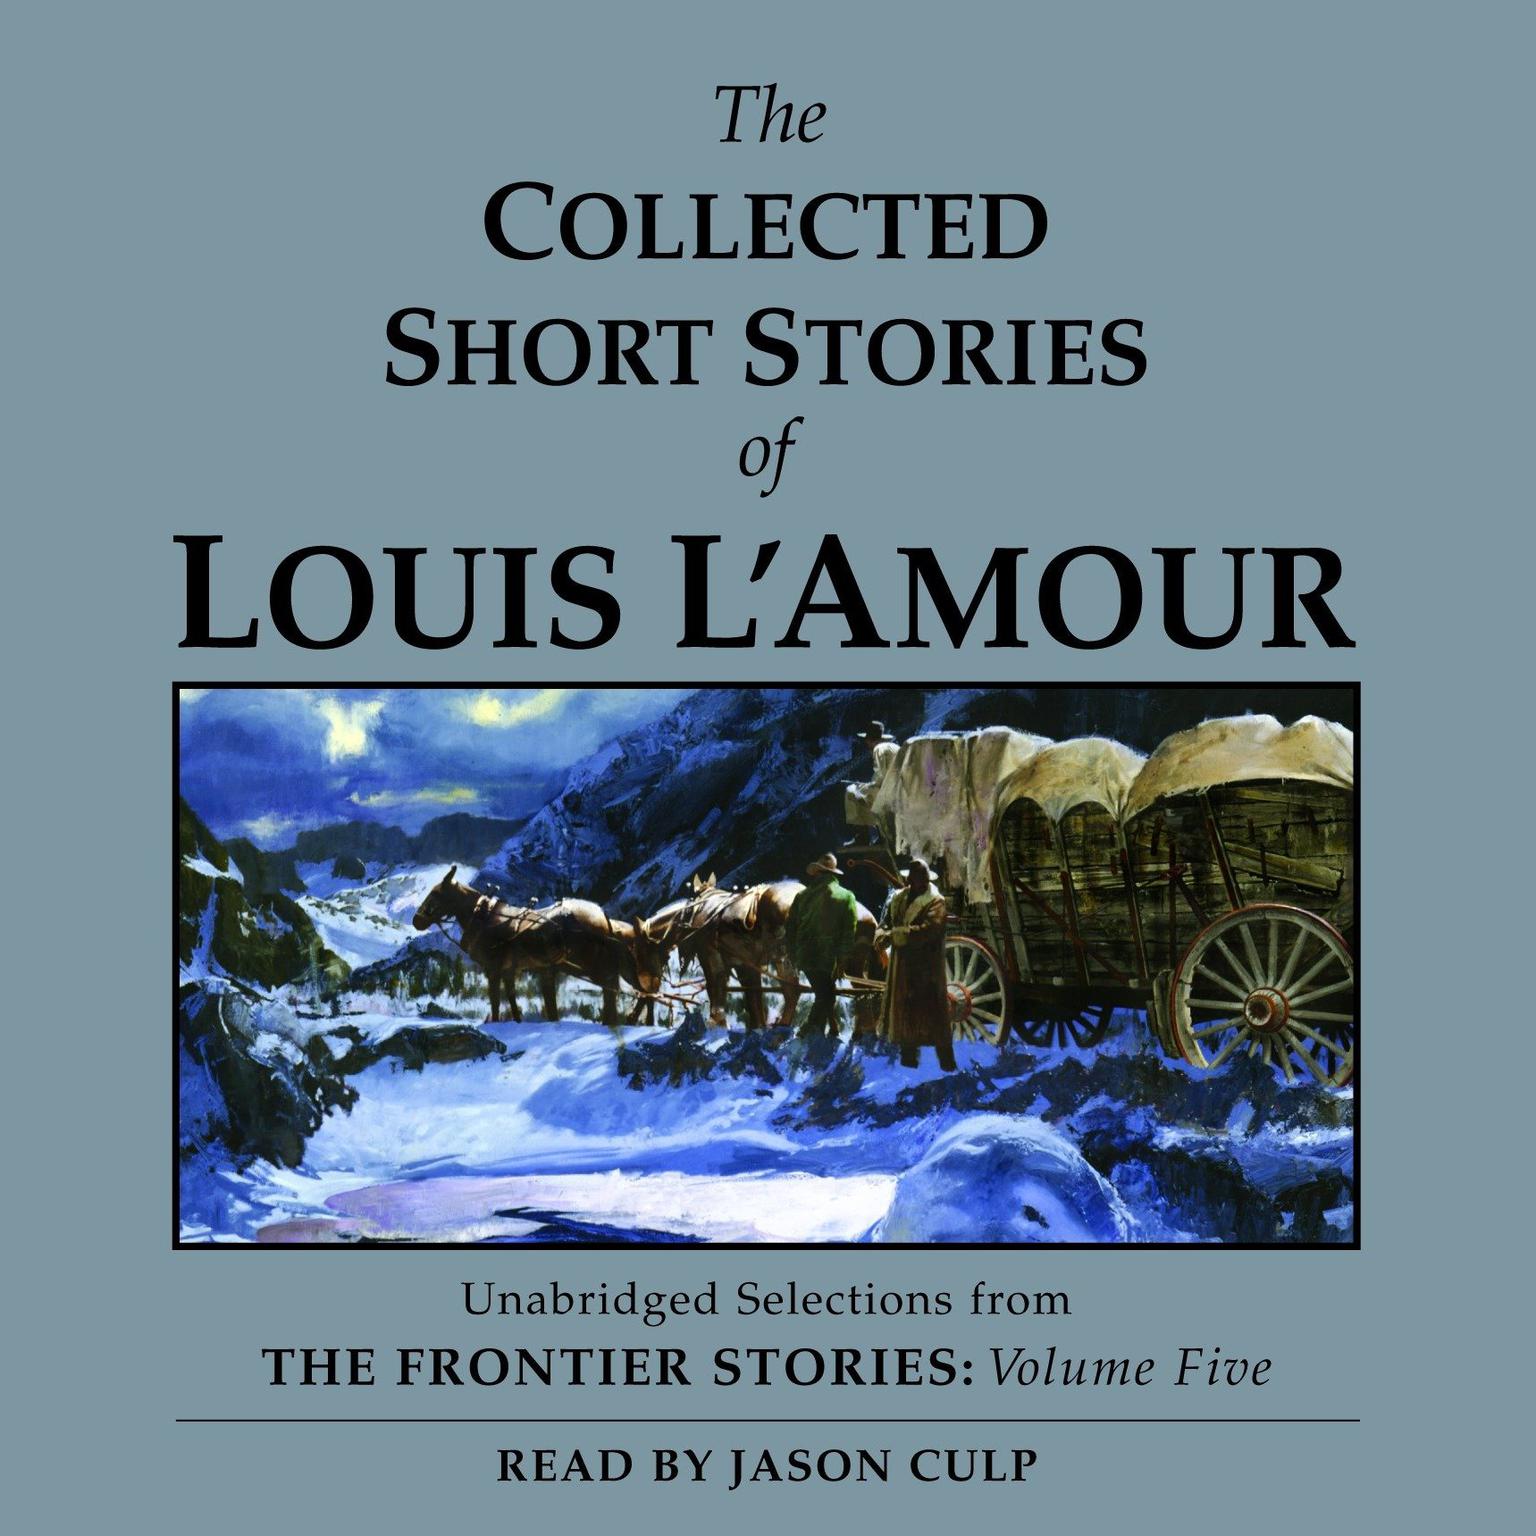 The Collected Short Stories of Louis LAmour: Unabridged Selections From The Frontier Stories, Volume 5: The Frontier Stories Audiobook, by Louis L’Amour